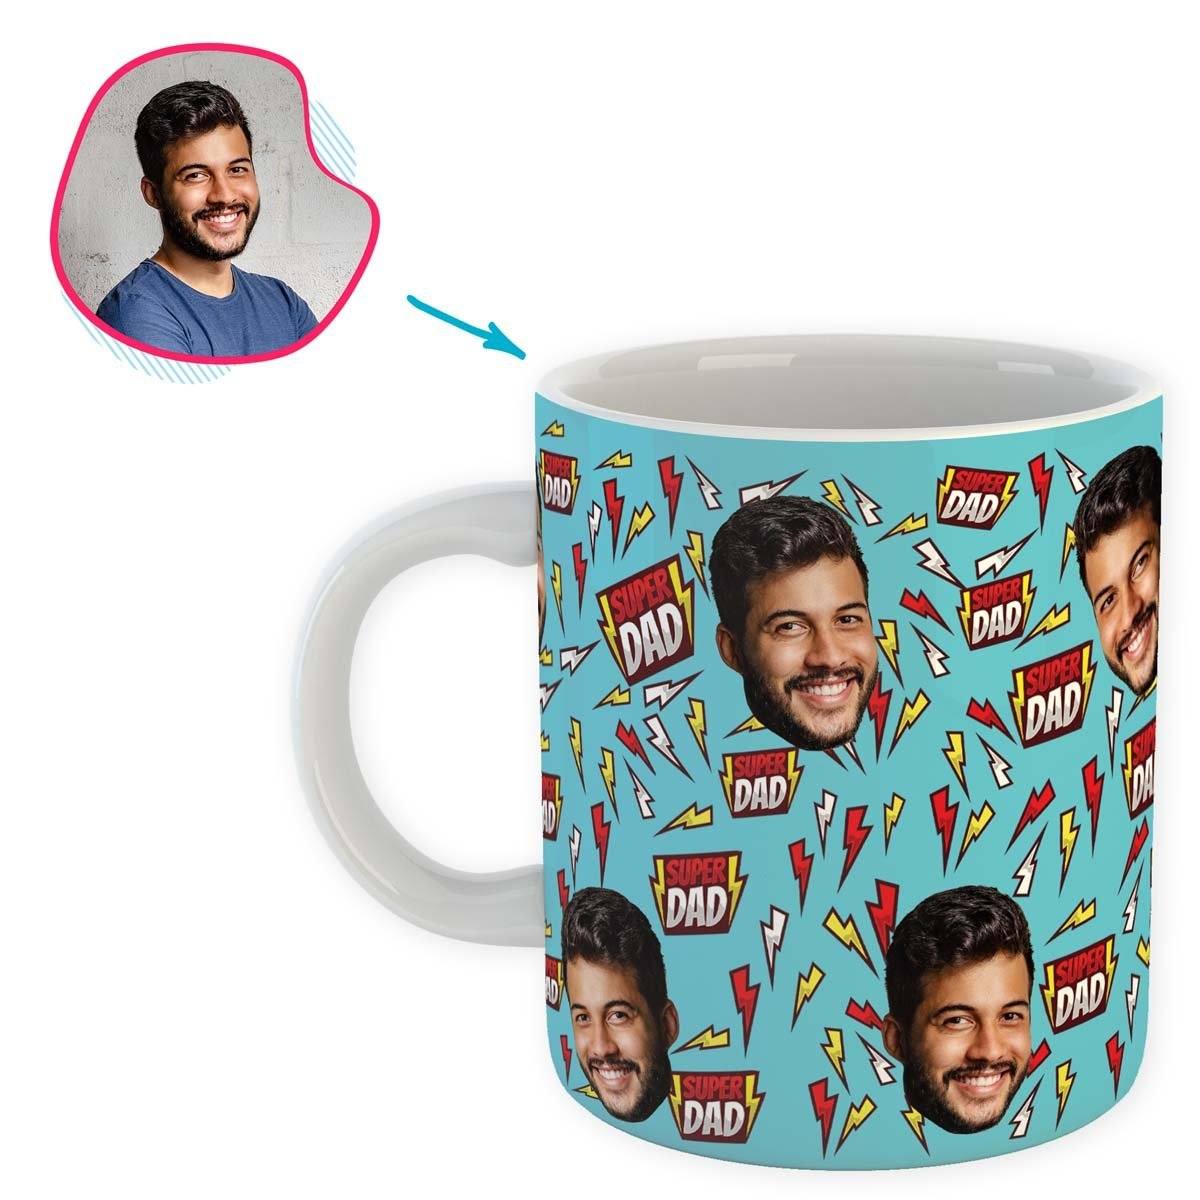 blue Super Dad mug personalized with photo of face printed on it